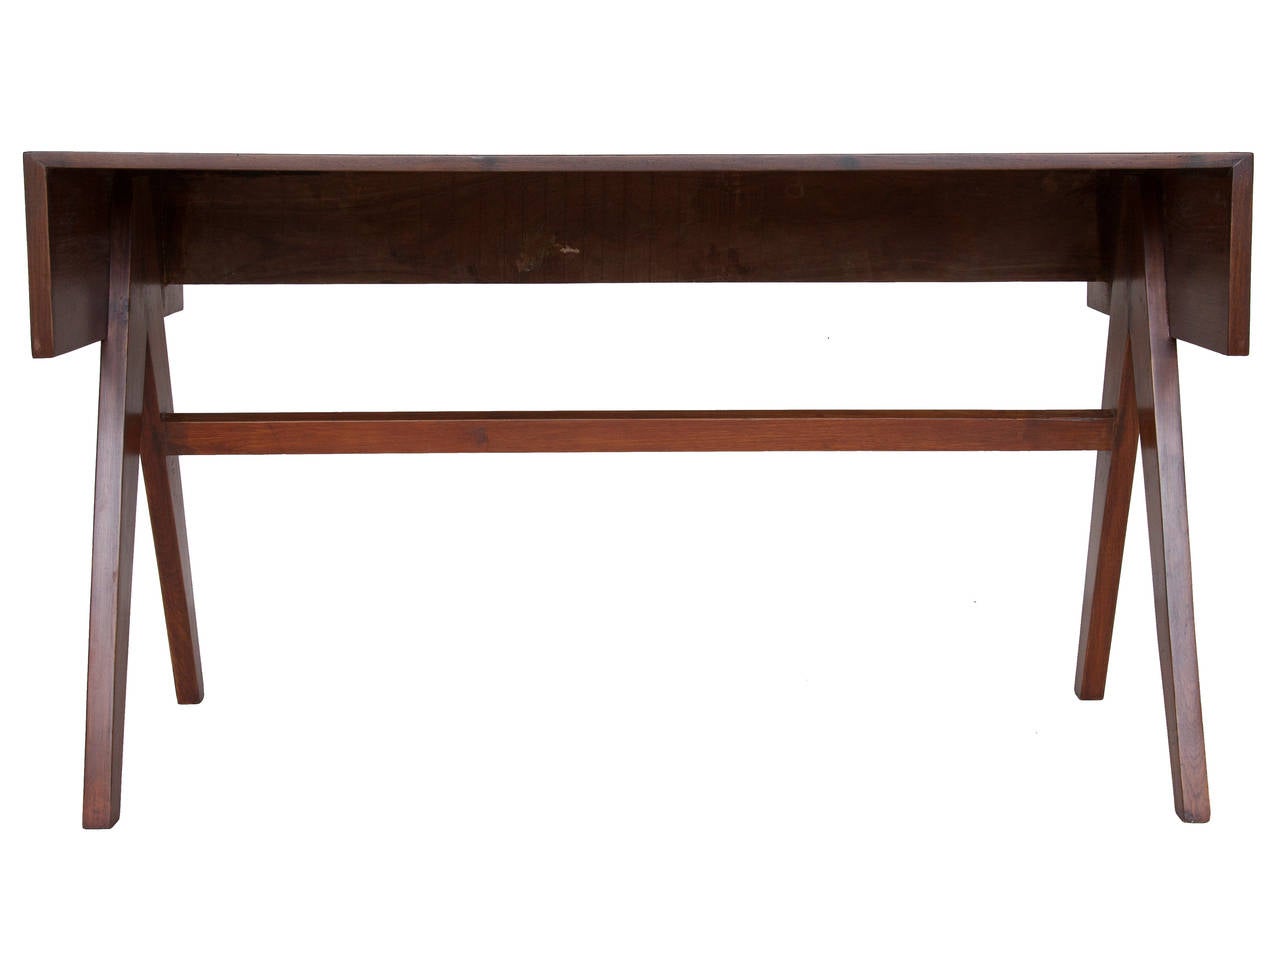 Compass leg student desks in teak from Chandigarh, India, designed by Pierre Jeanneret.